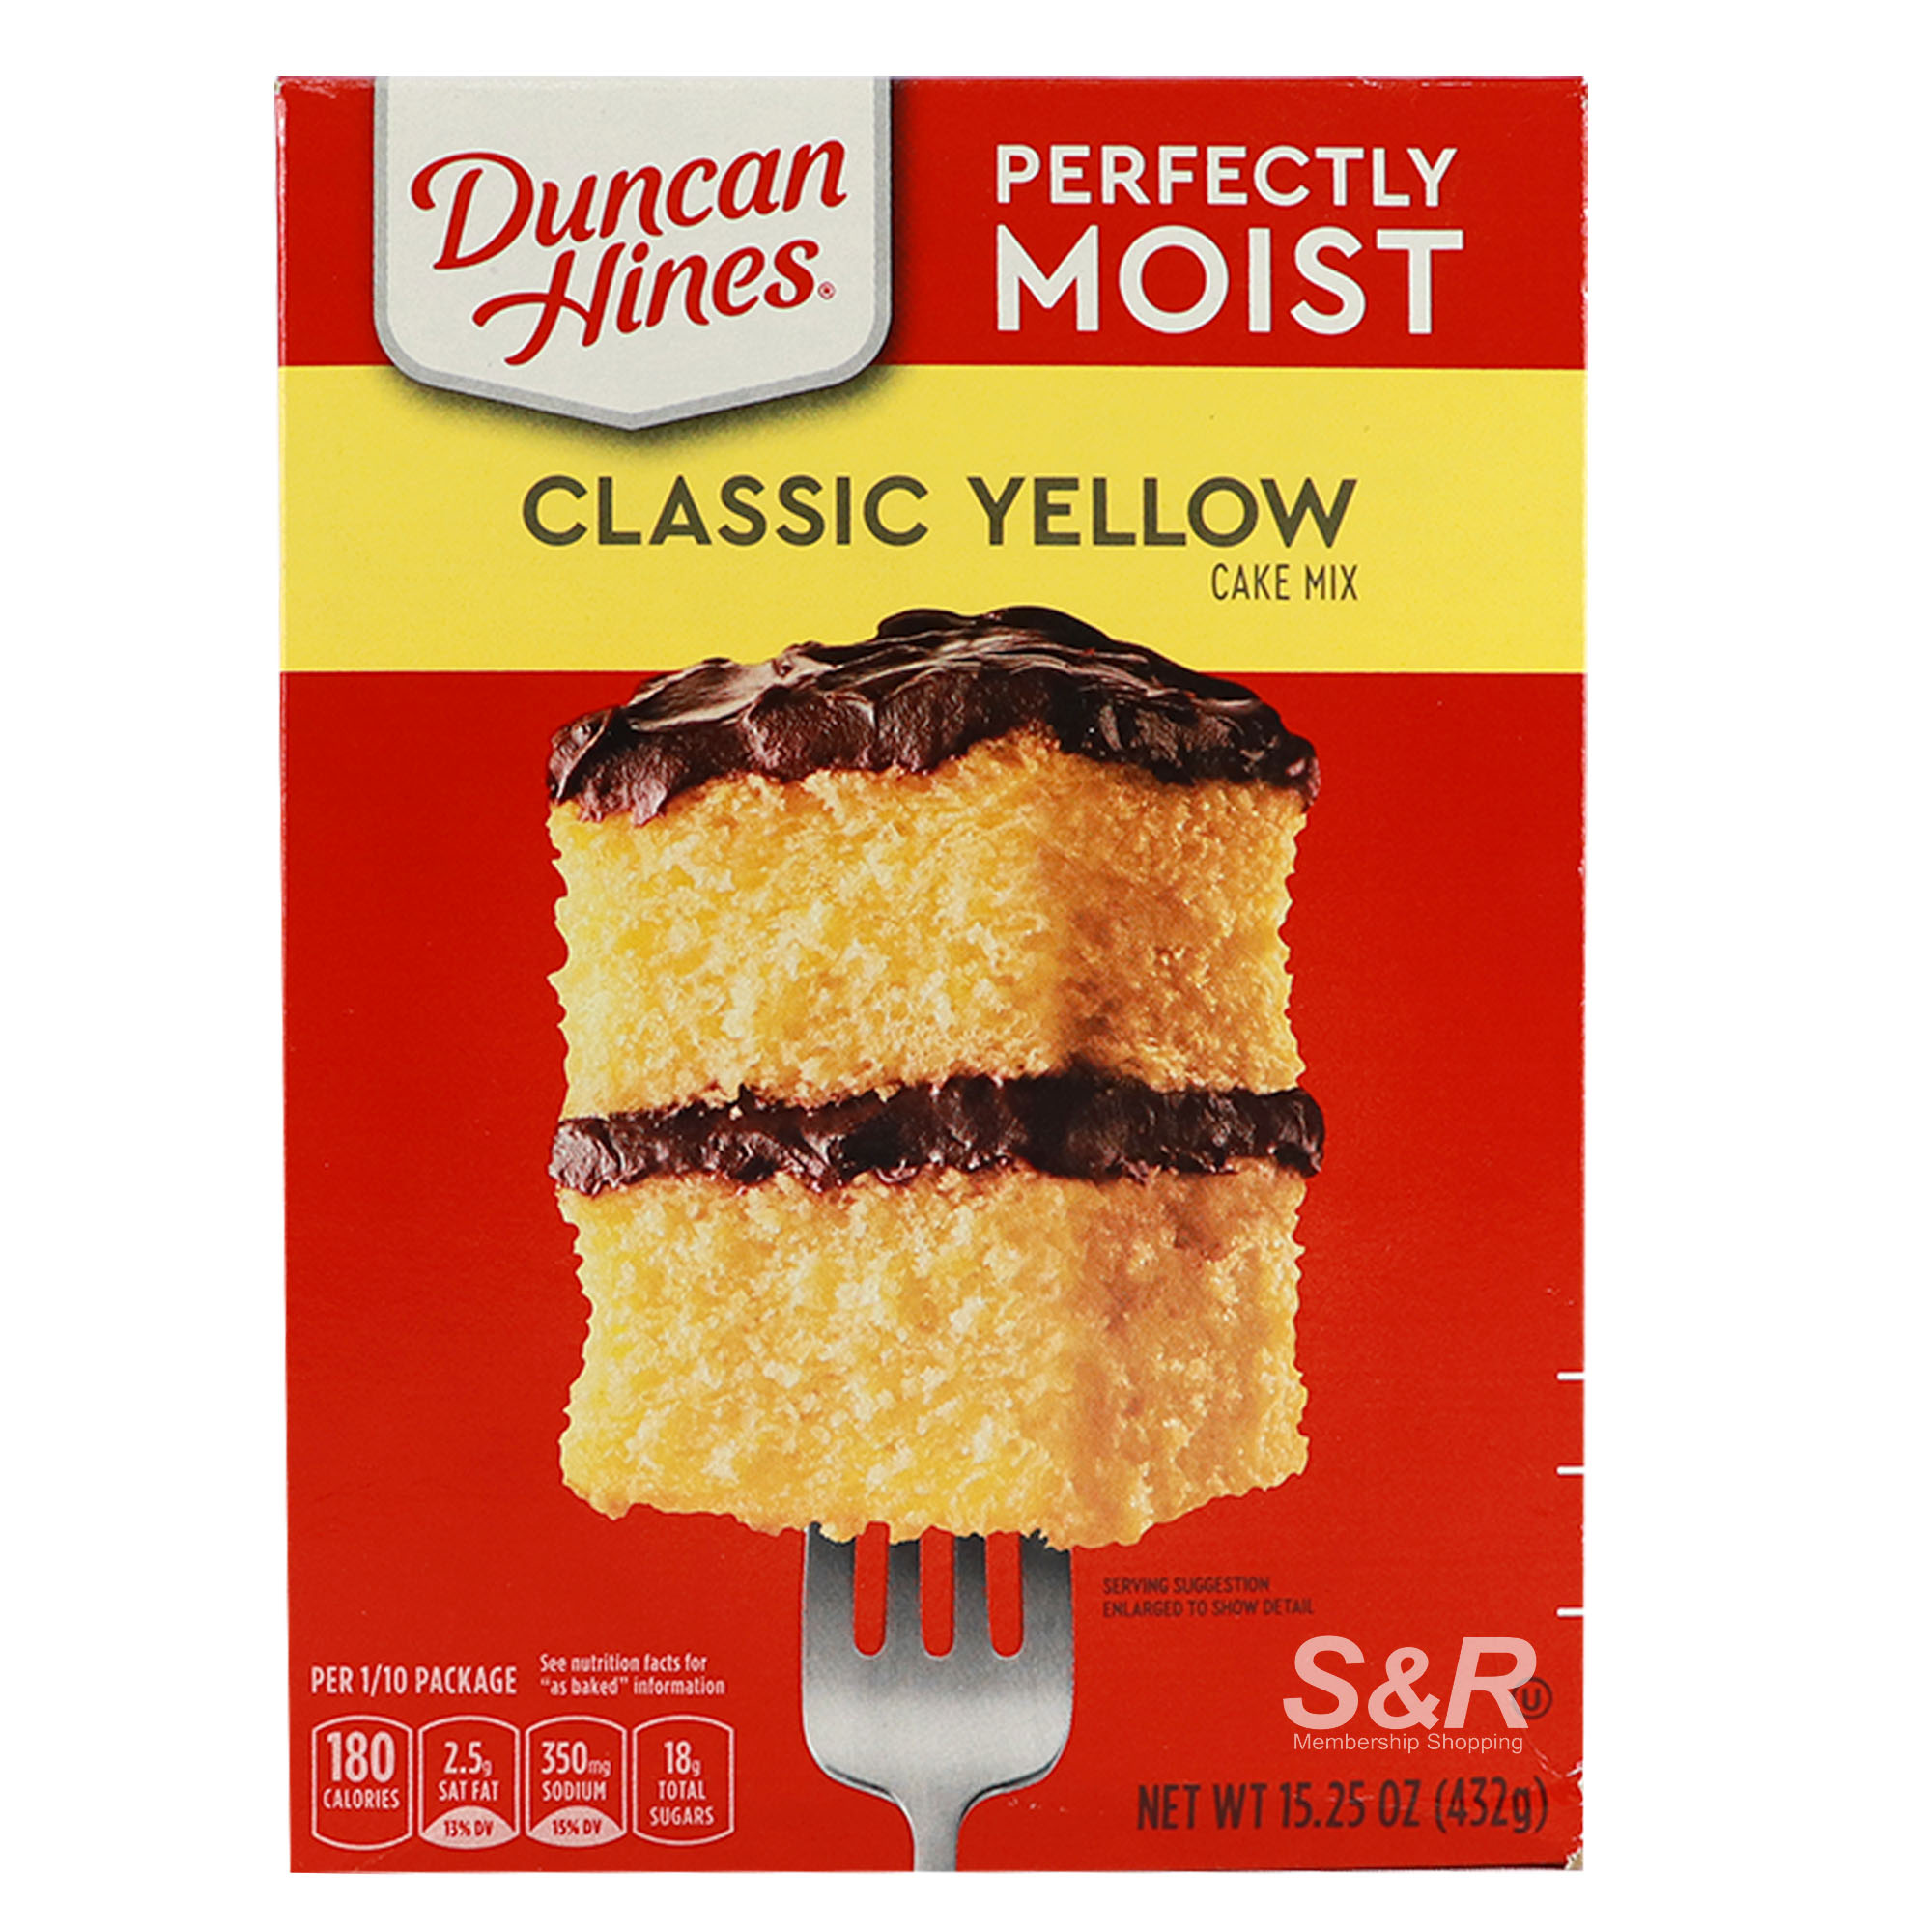 Duncan Hines Perfectly Moist Classic Yellow Cake Mix 432g